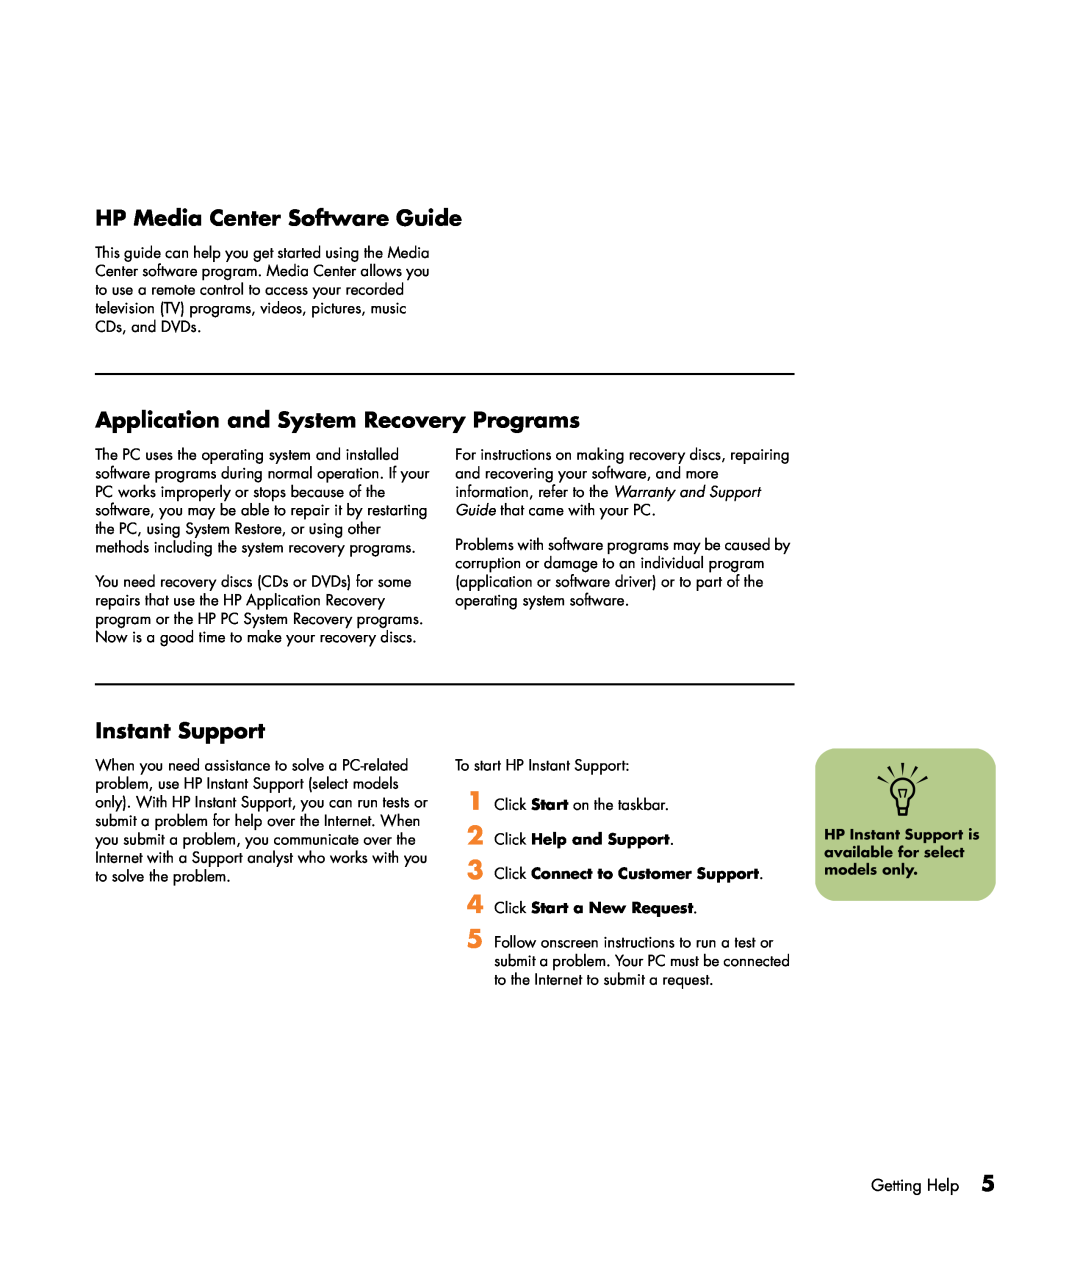 HP m1277c, m1299a, m1297c, m1297a HP Media Center Software Guide, Application and System Recovery Programs, Instant Support 